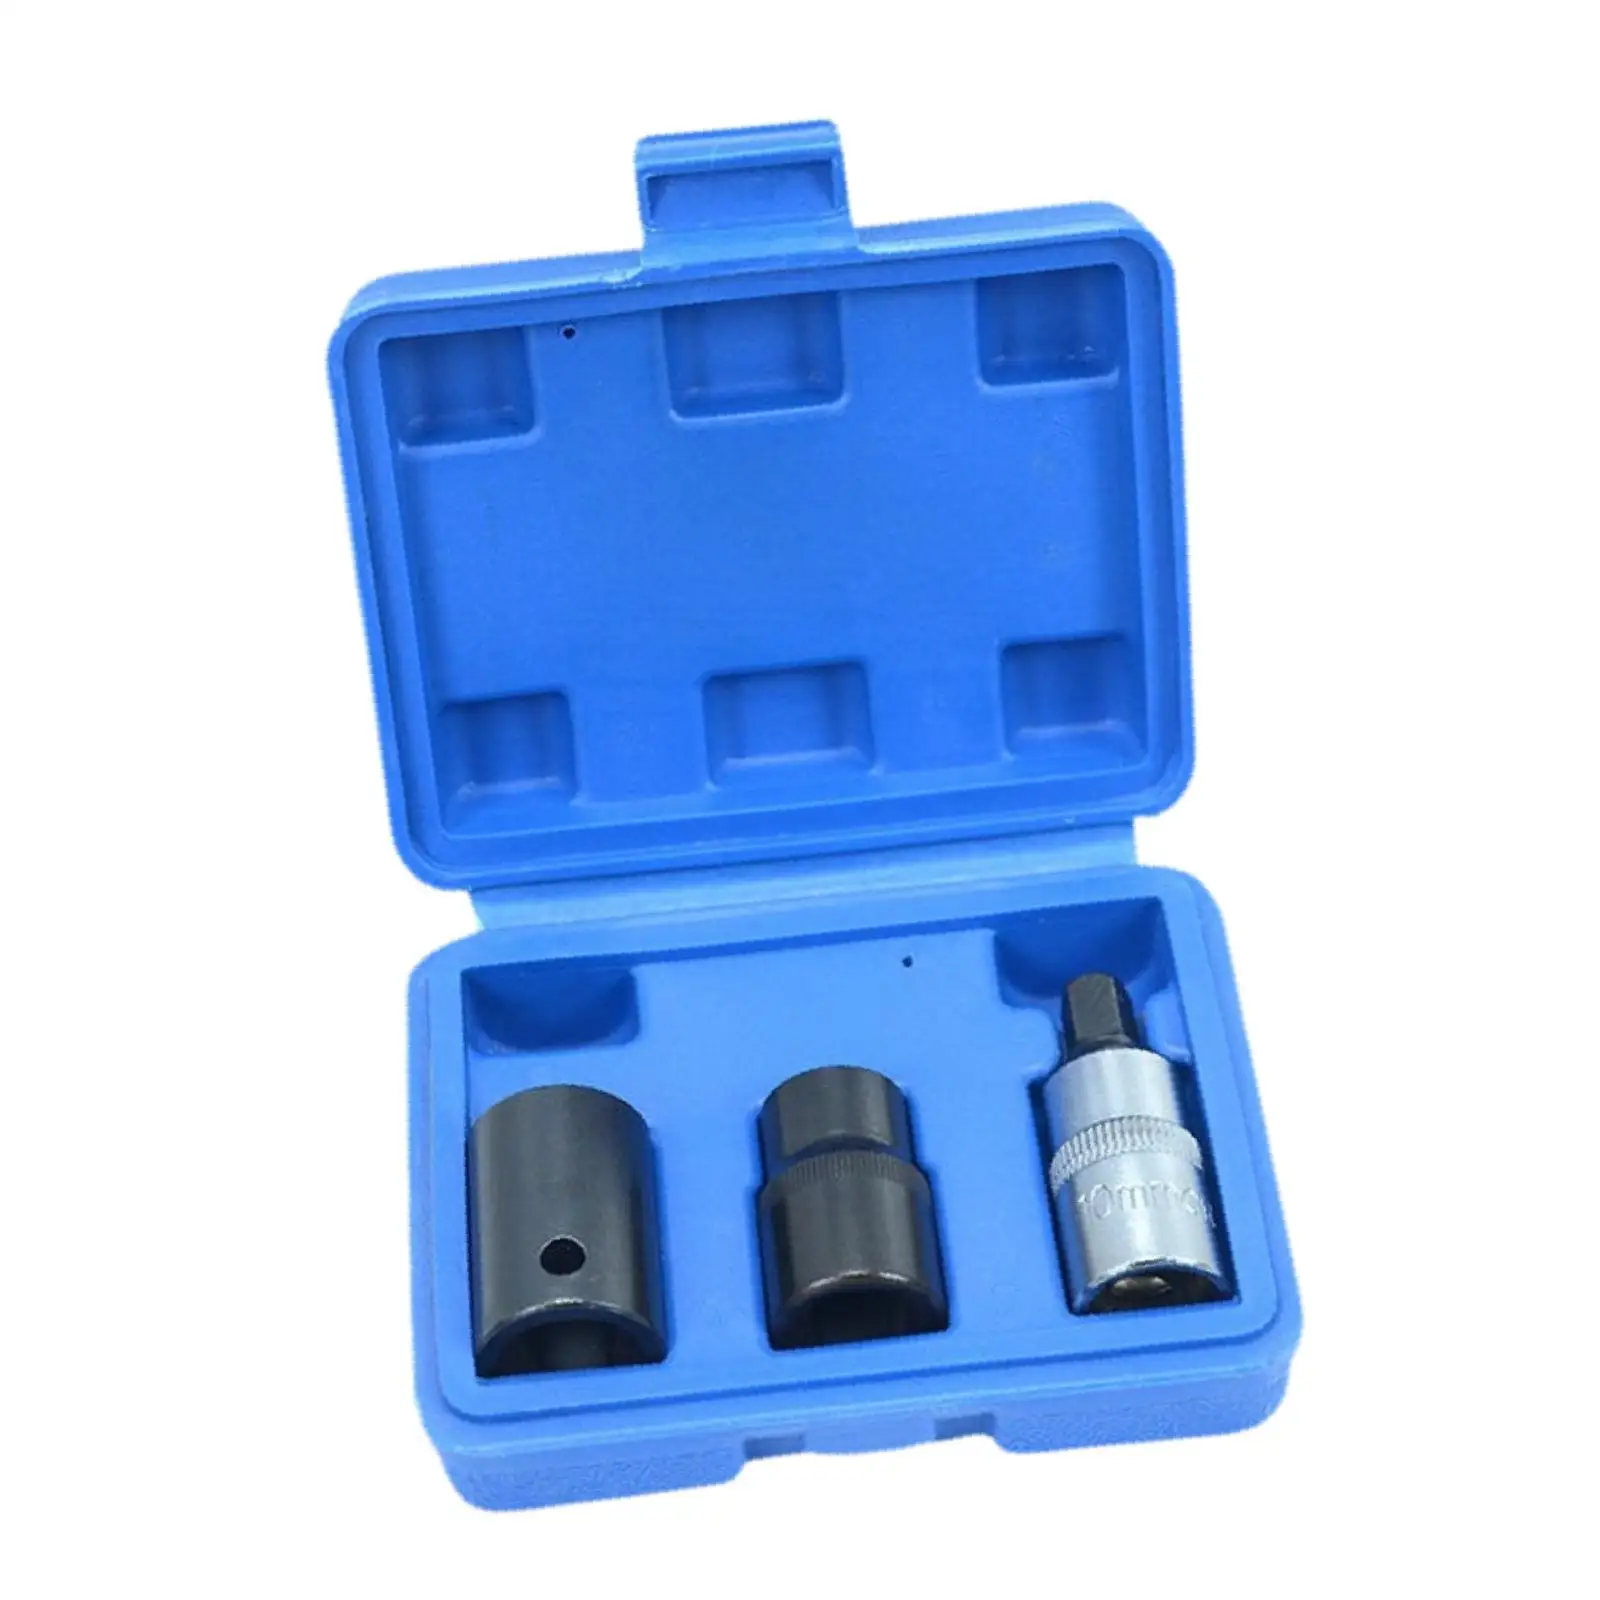 

Pentagonal Key Brake Caliper 1/2" with Storage Case Manual Tool Internal and External Sturdy Steel Special Tool Socket Wrench